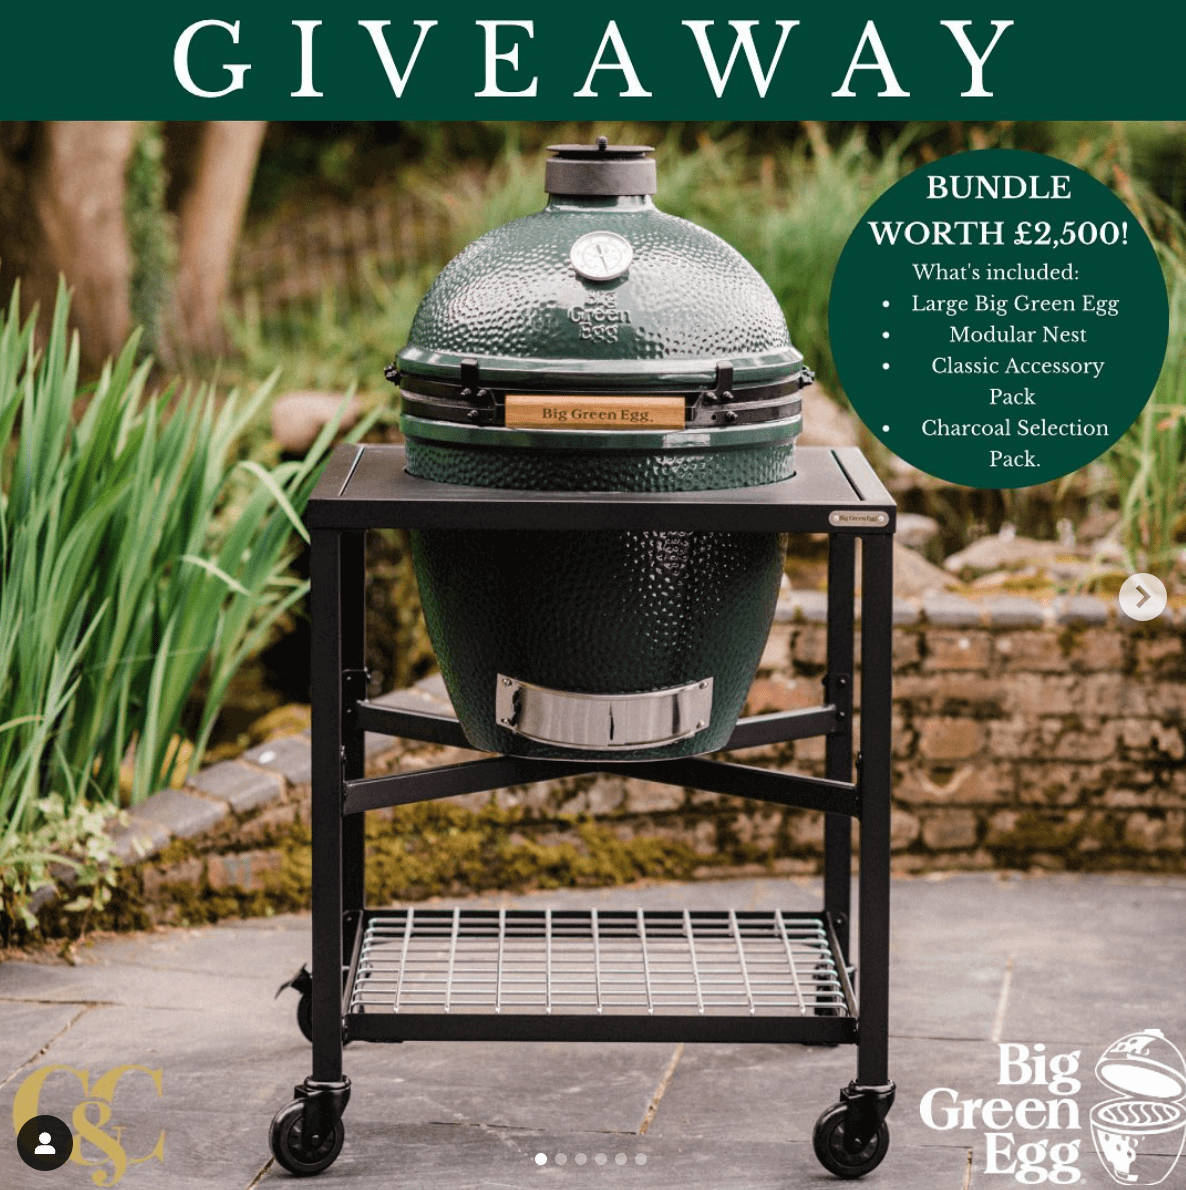 Win a barbecue bundle worth £2,500 with Big Green Egg